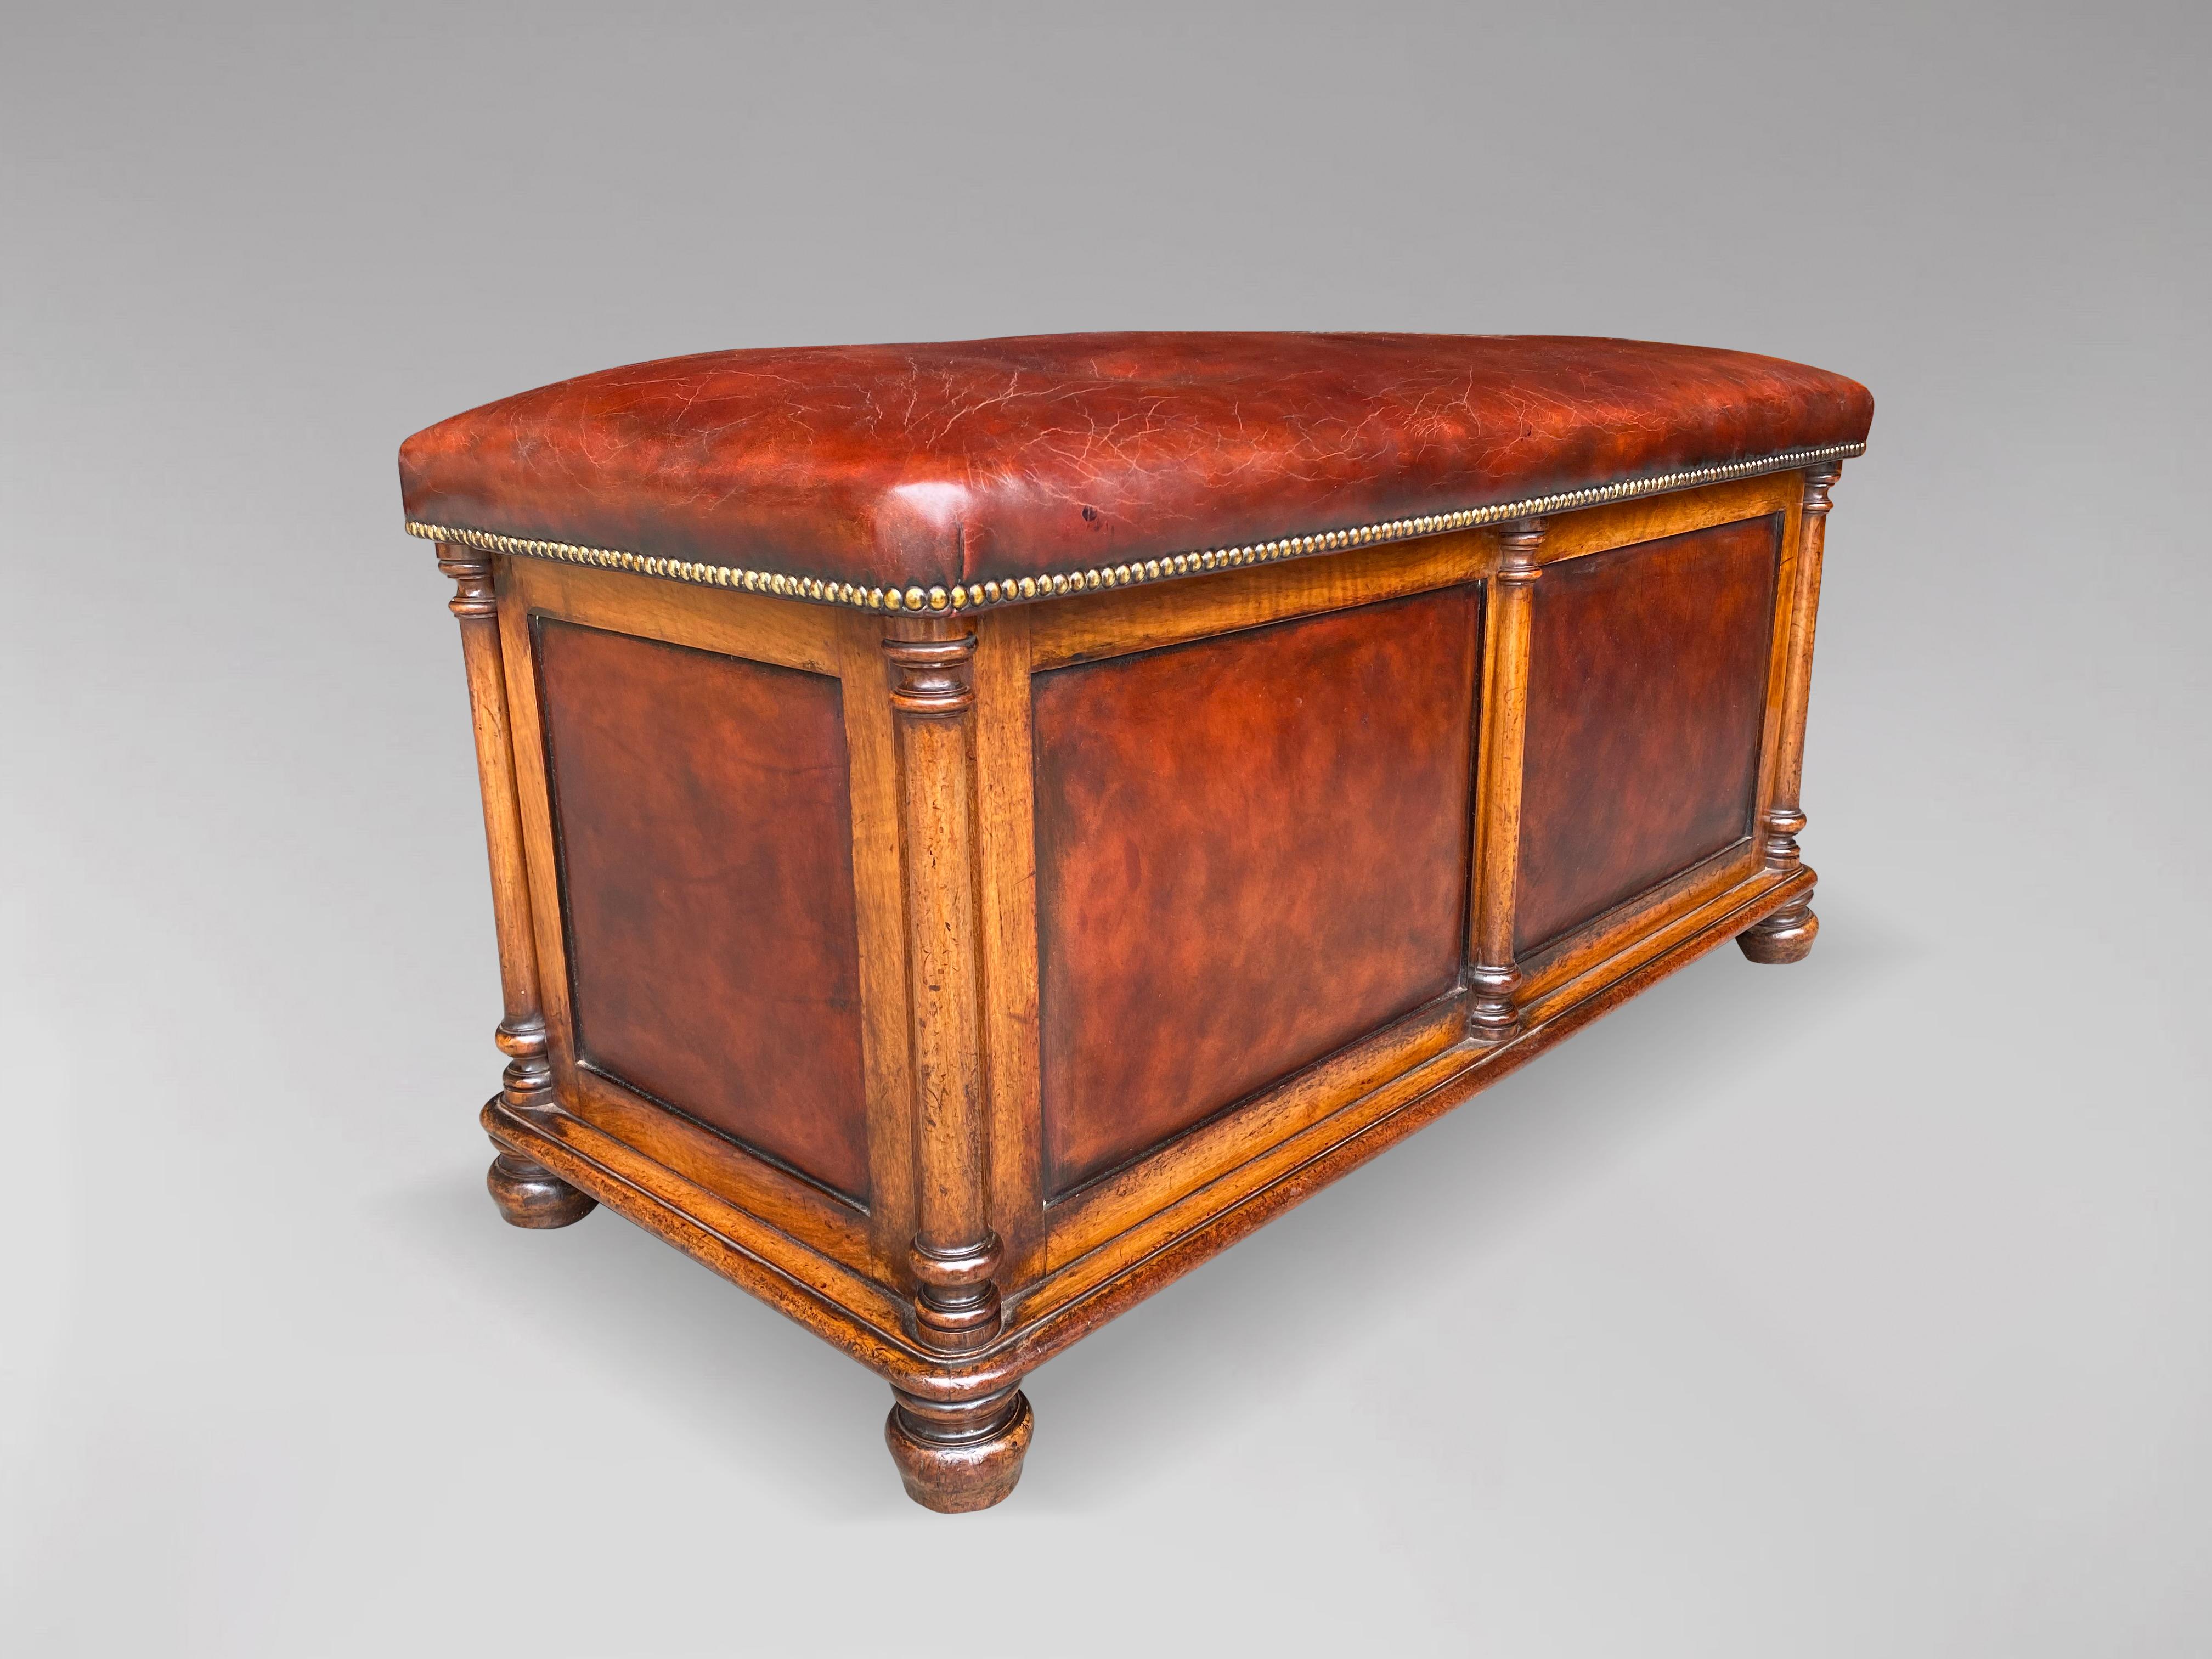 British 19th Century, William IV Period Walnut and Leather Ottoman For Sale